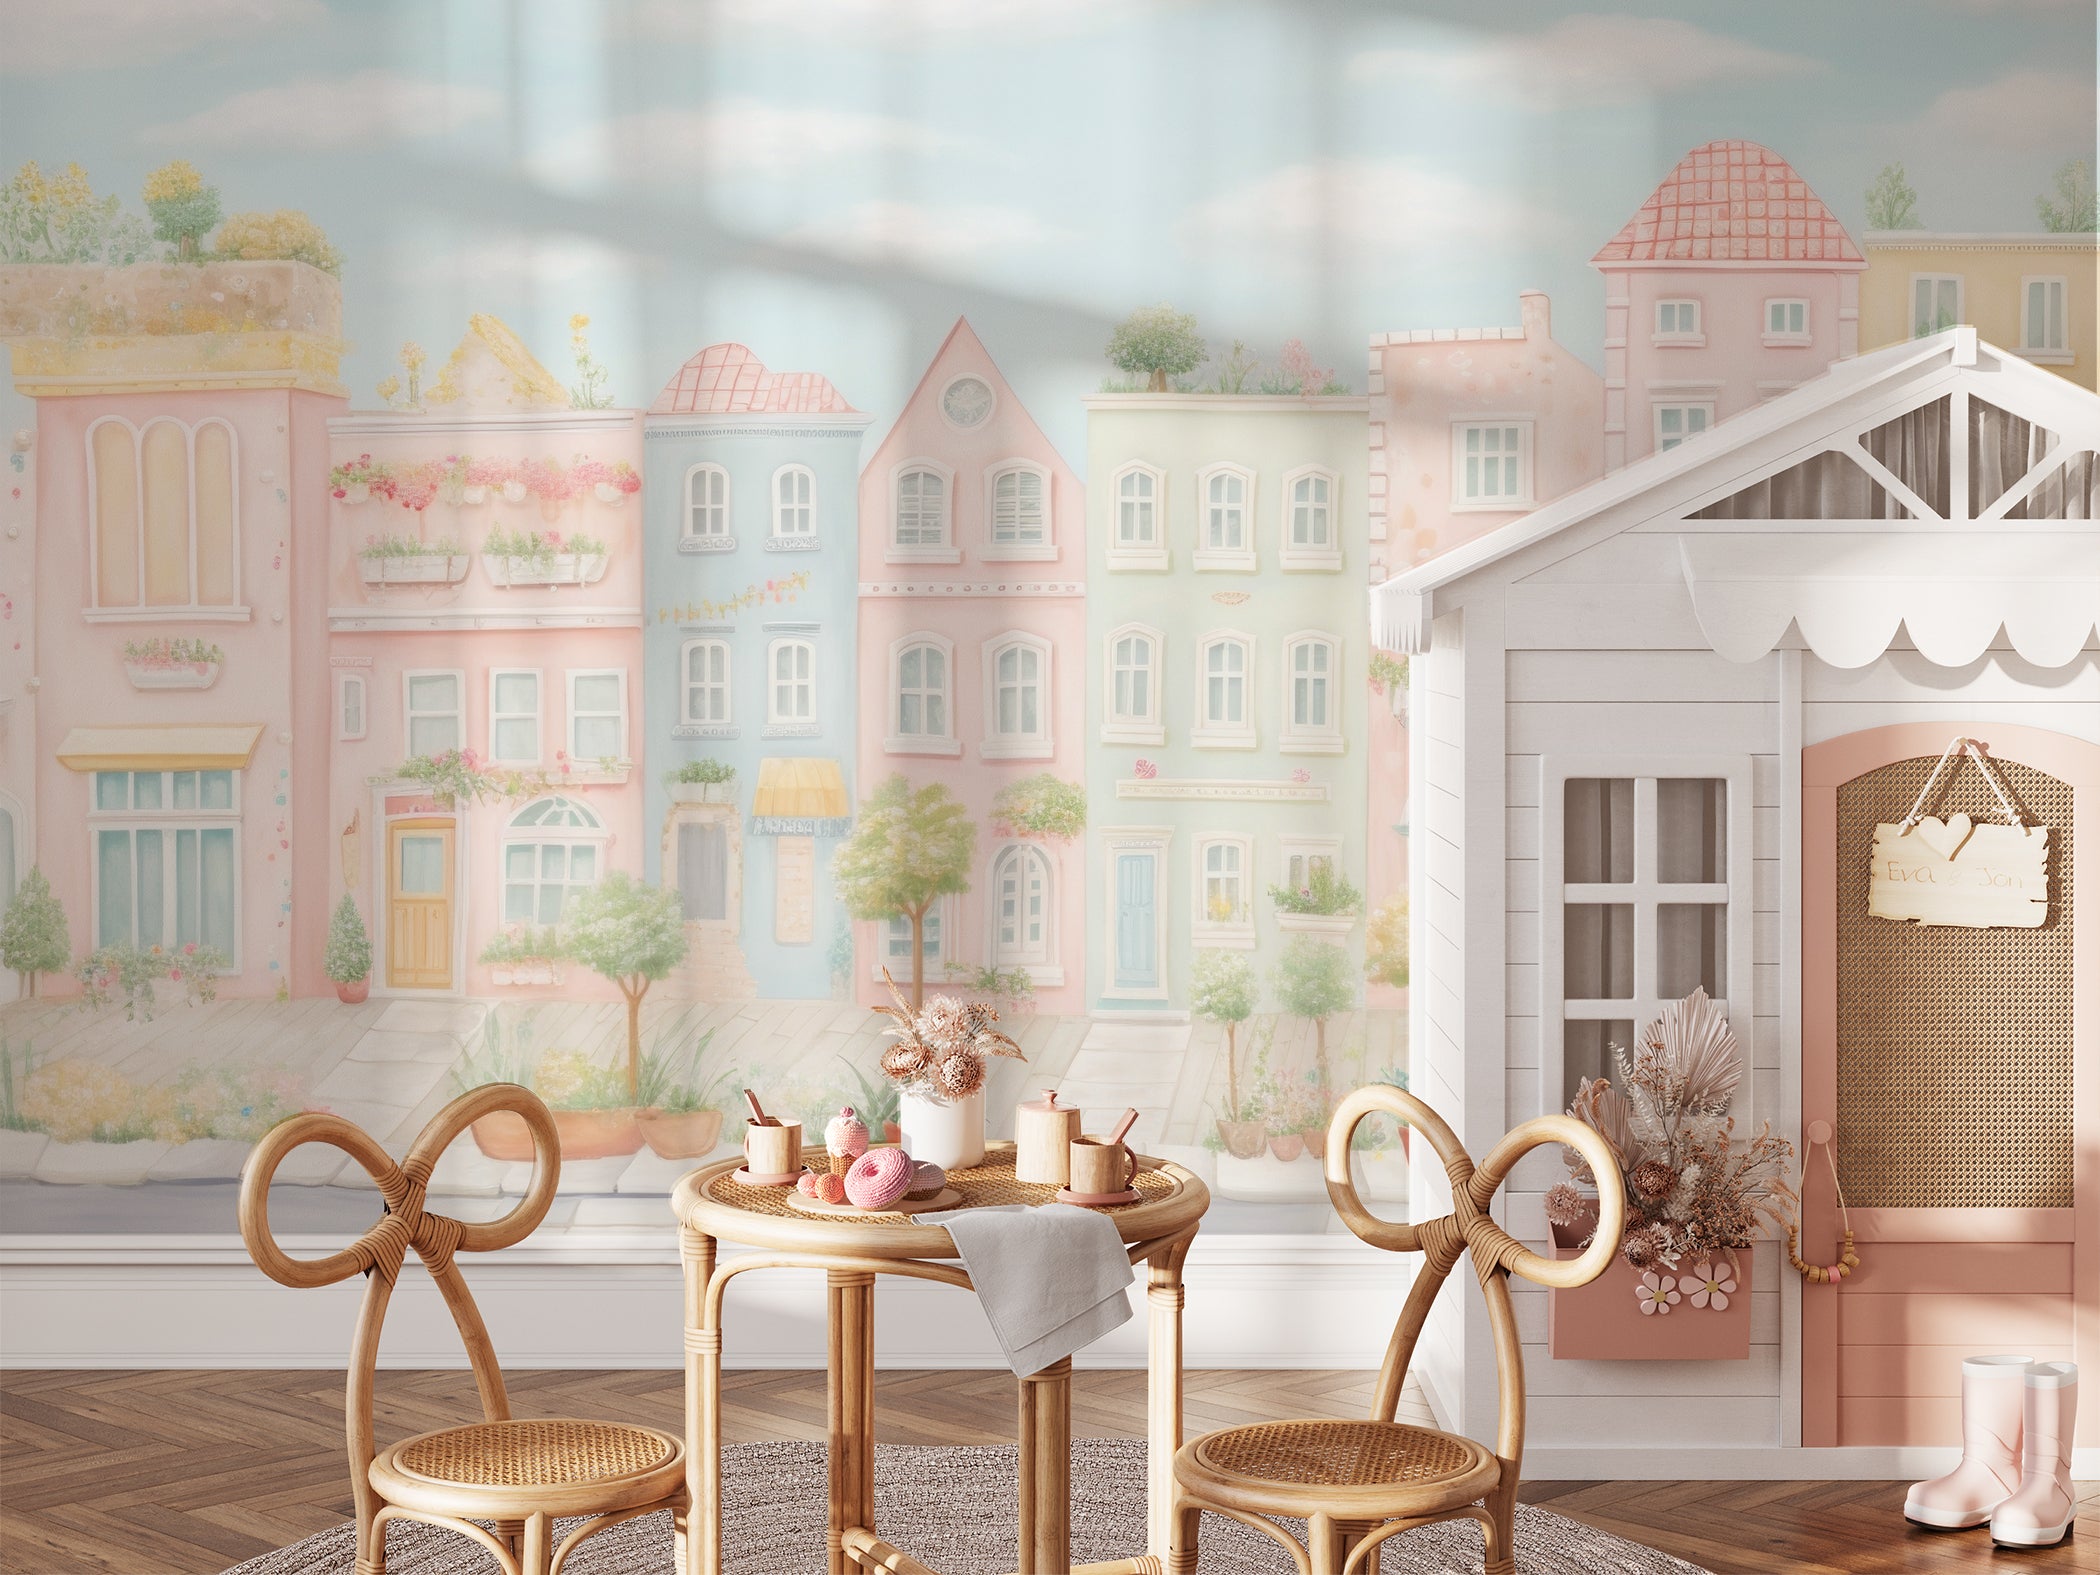 A playful and bright children's area featuring the Cinque Terre Townhouse Wallpaper. The scene on the wallpaper depicts a quaint town with pastel-colored buildings. The room is decorated with a playhouse, wicker chairs, and a small table set for tea.